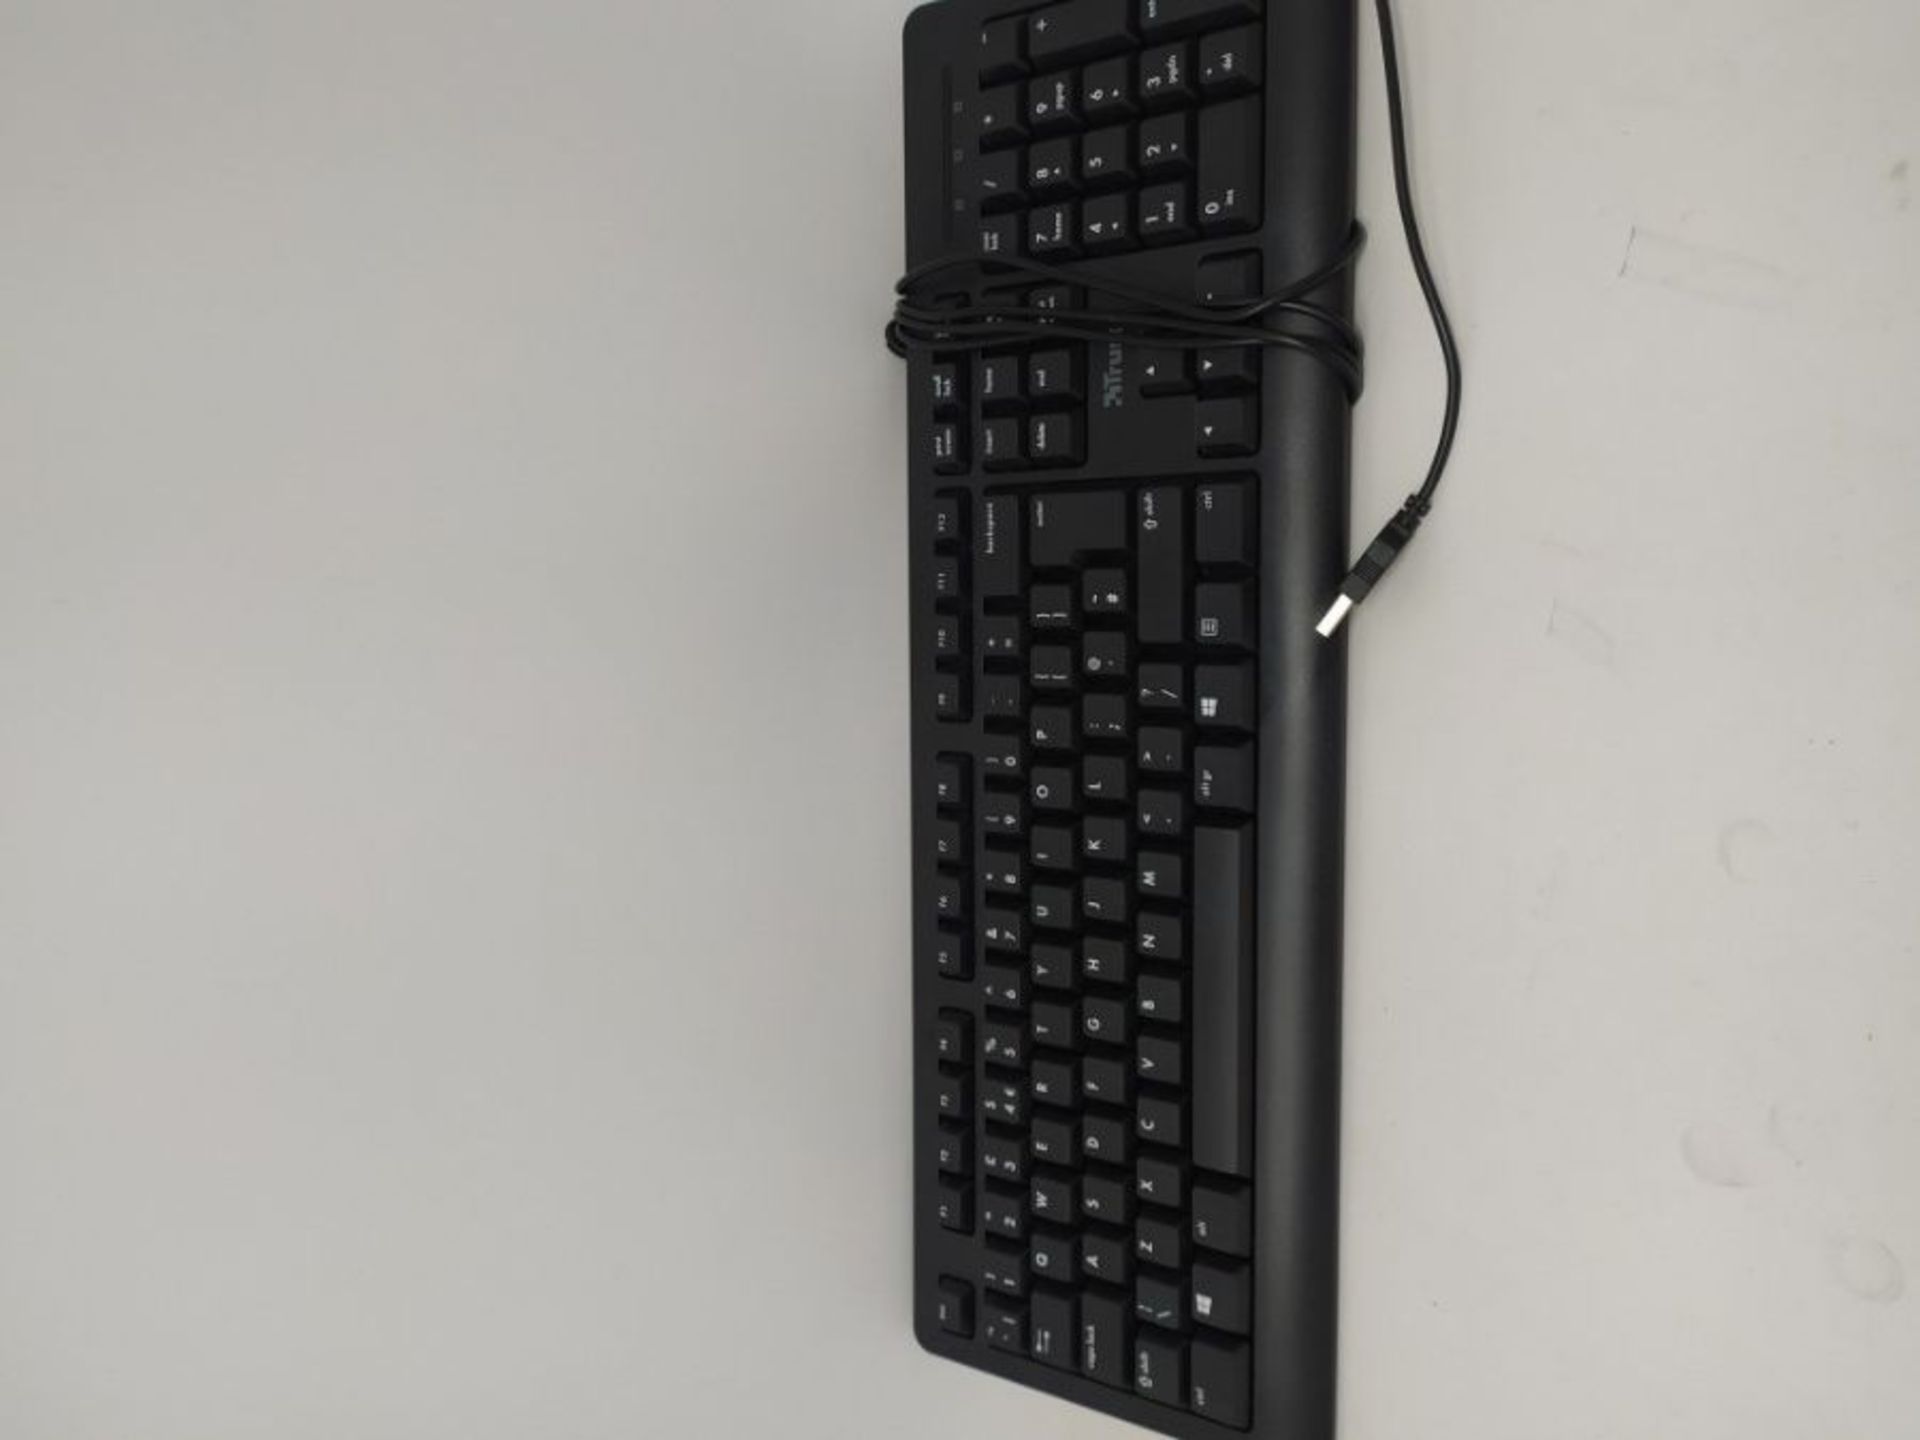 Trust Taro Wired Keyboard - Qwerty UK Layout, Quiet Keys, Full-Size Keyboard, Spill-Re - Image 2 of 2